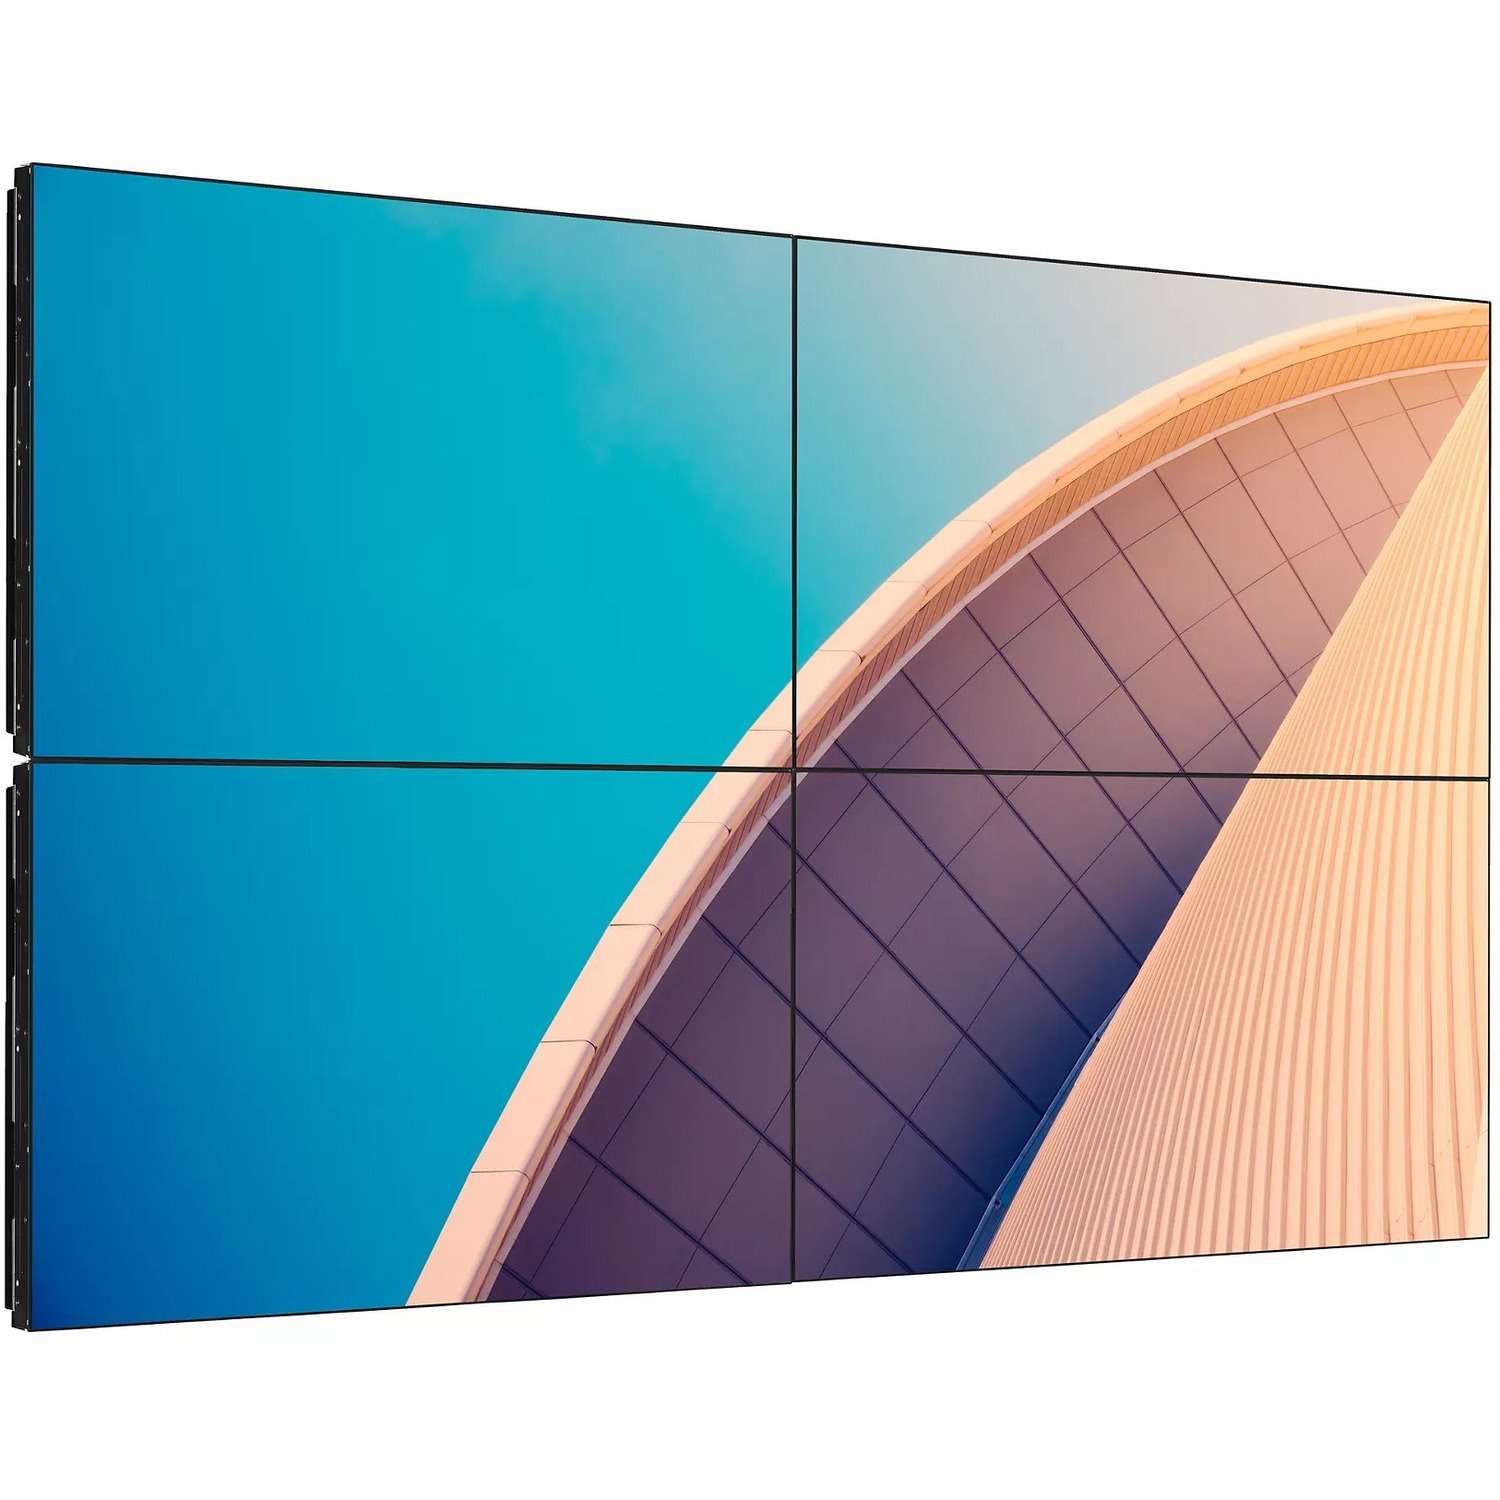 Philips Signage Solutions Video Wall Display